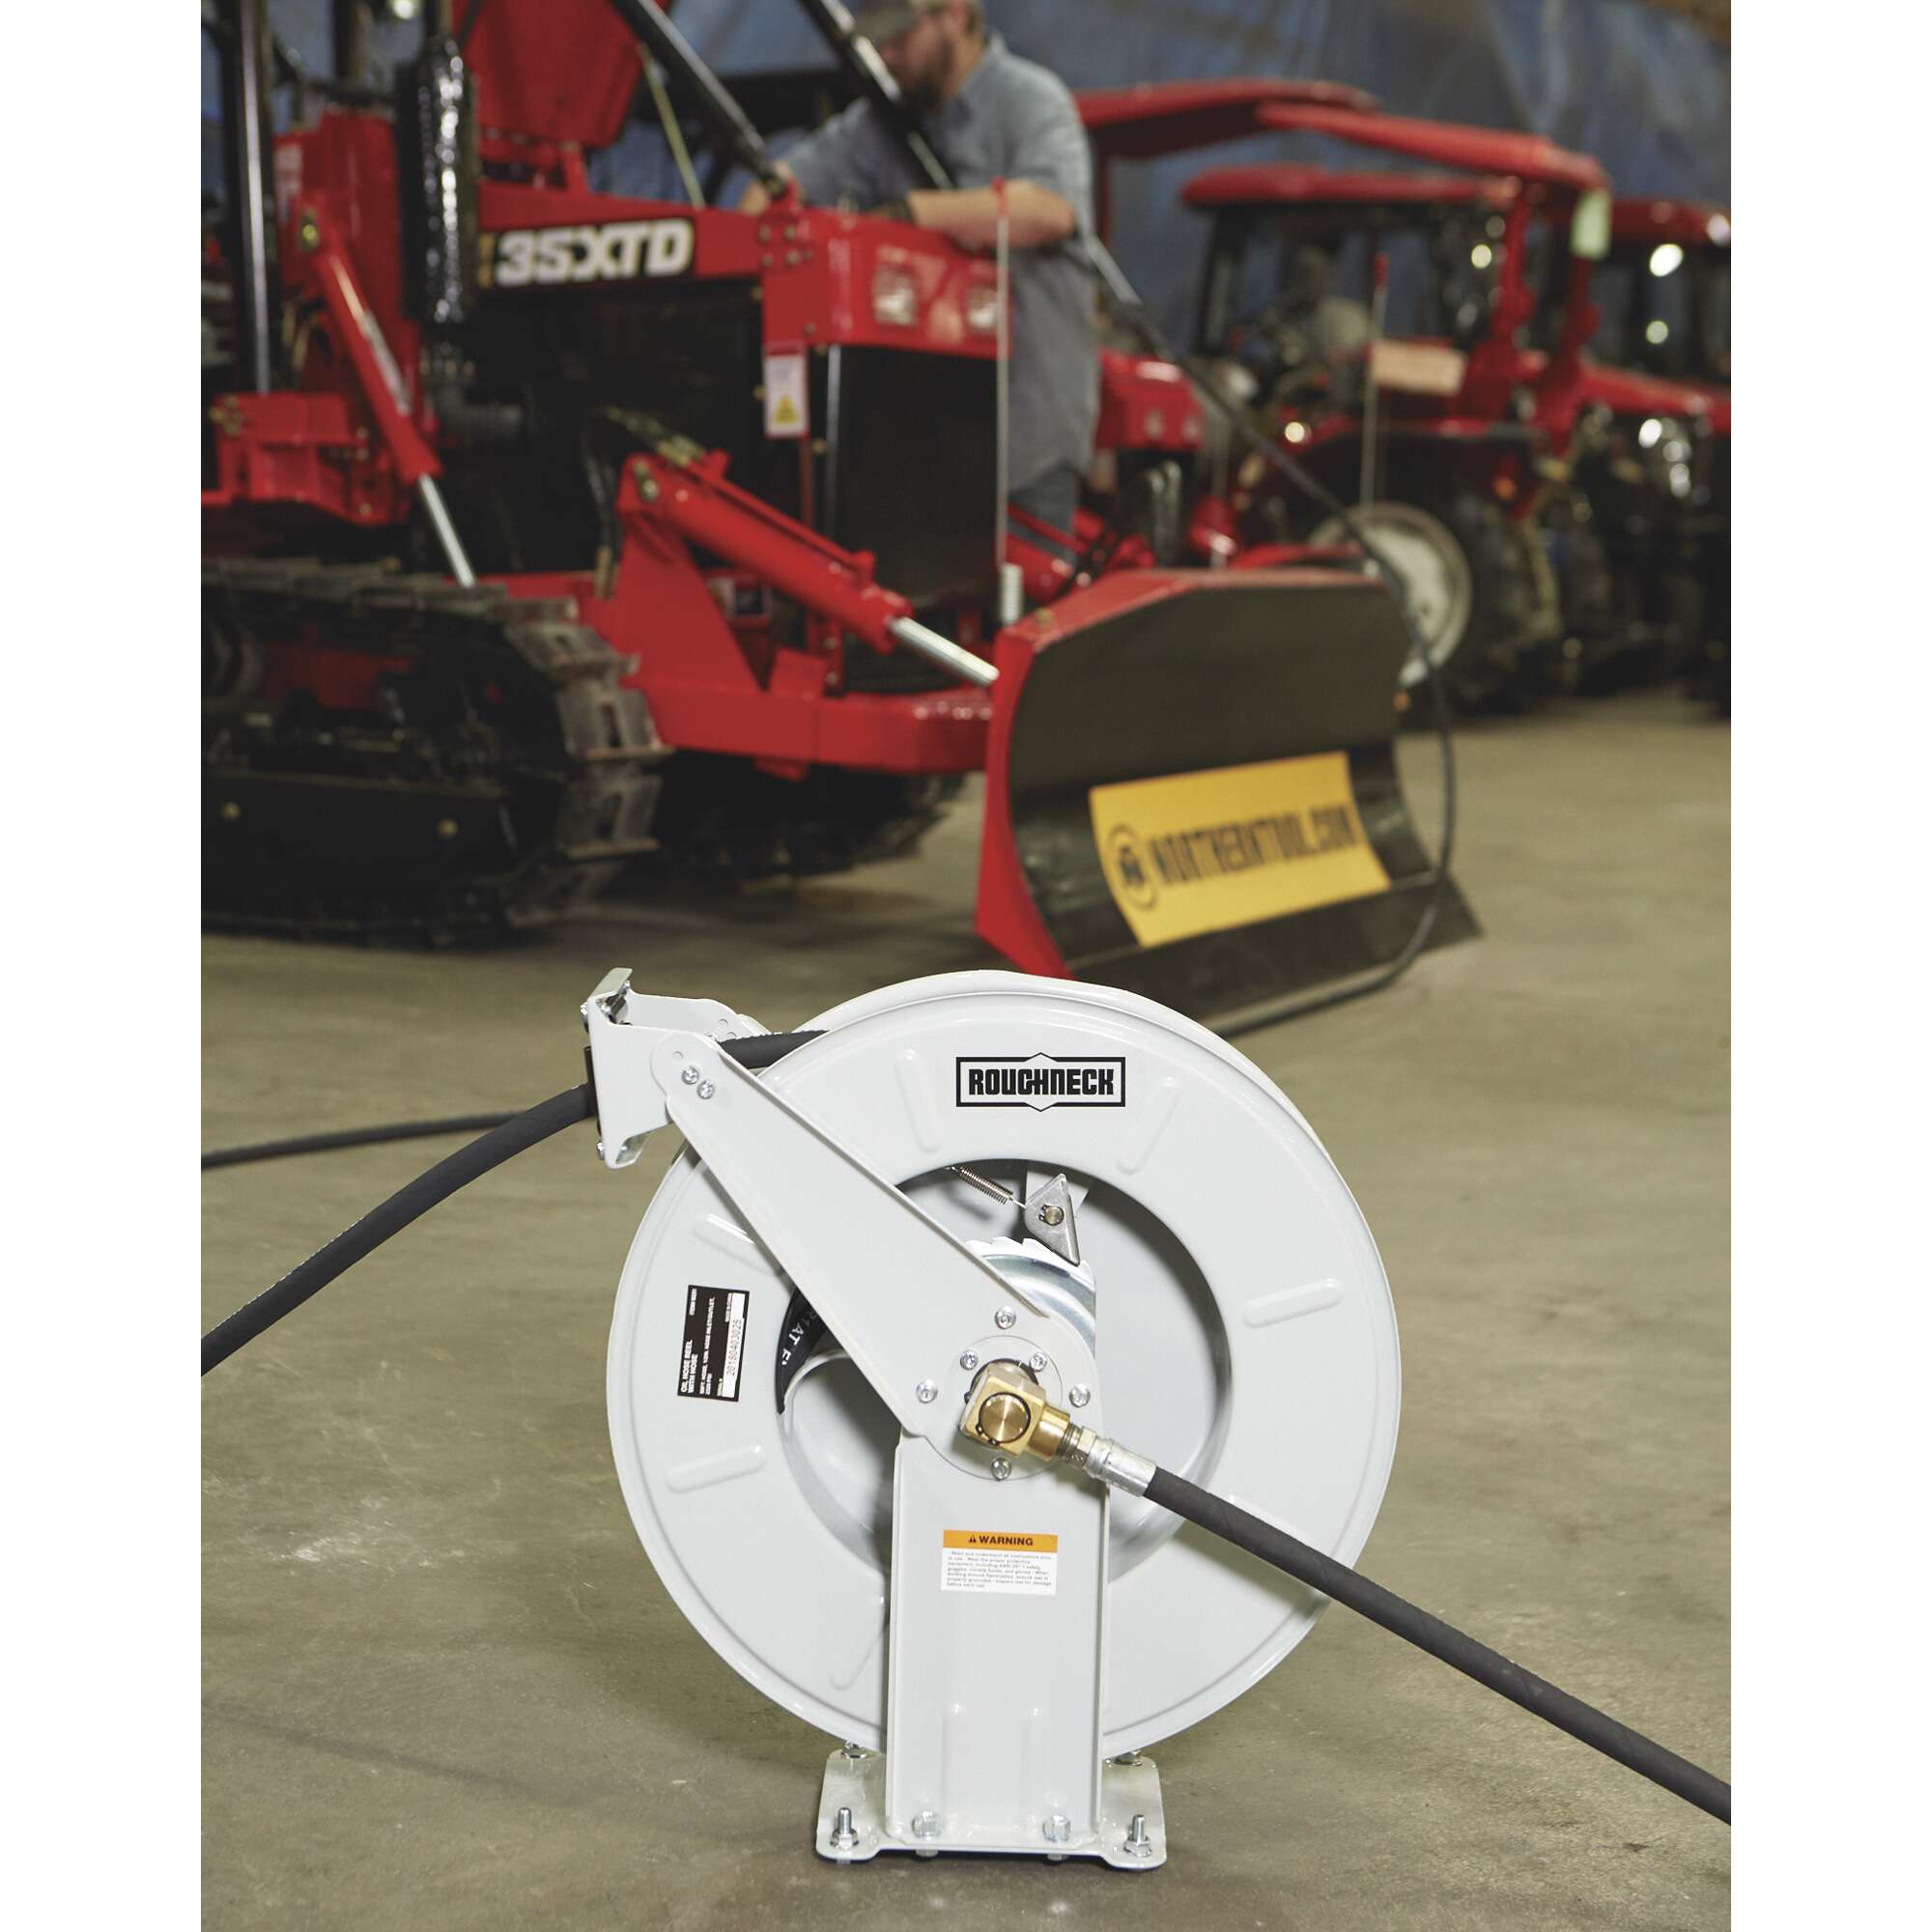 Roughneck Heavy Duty Oil Hose Reel With 1/2in x 50ft Hose 2320 PSI